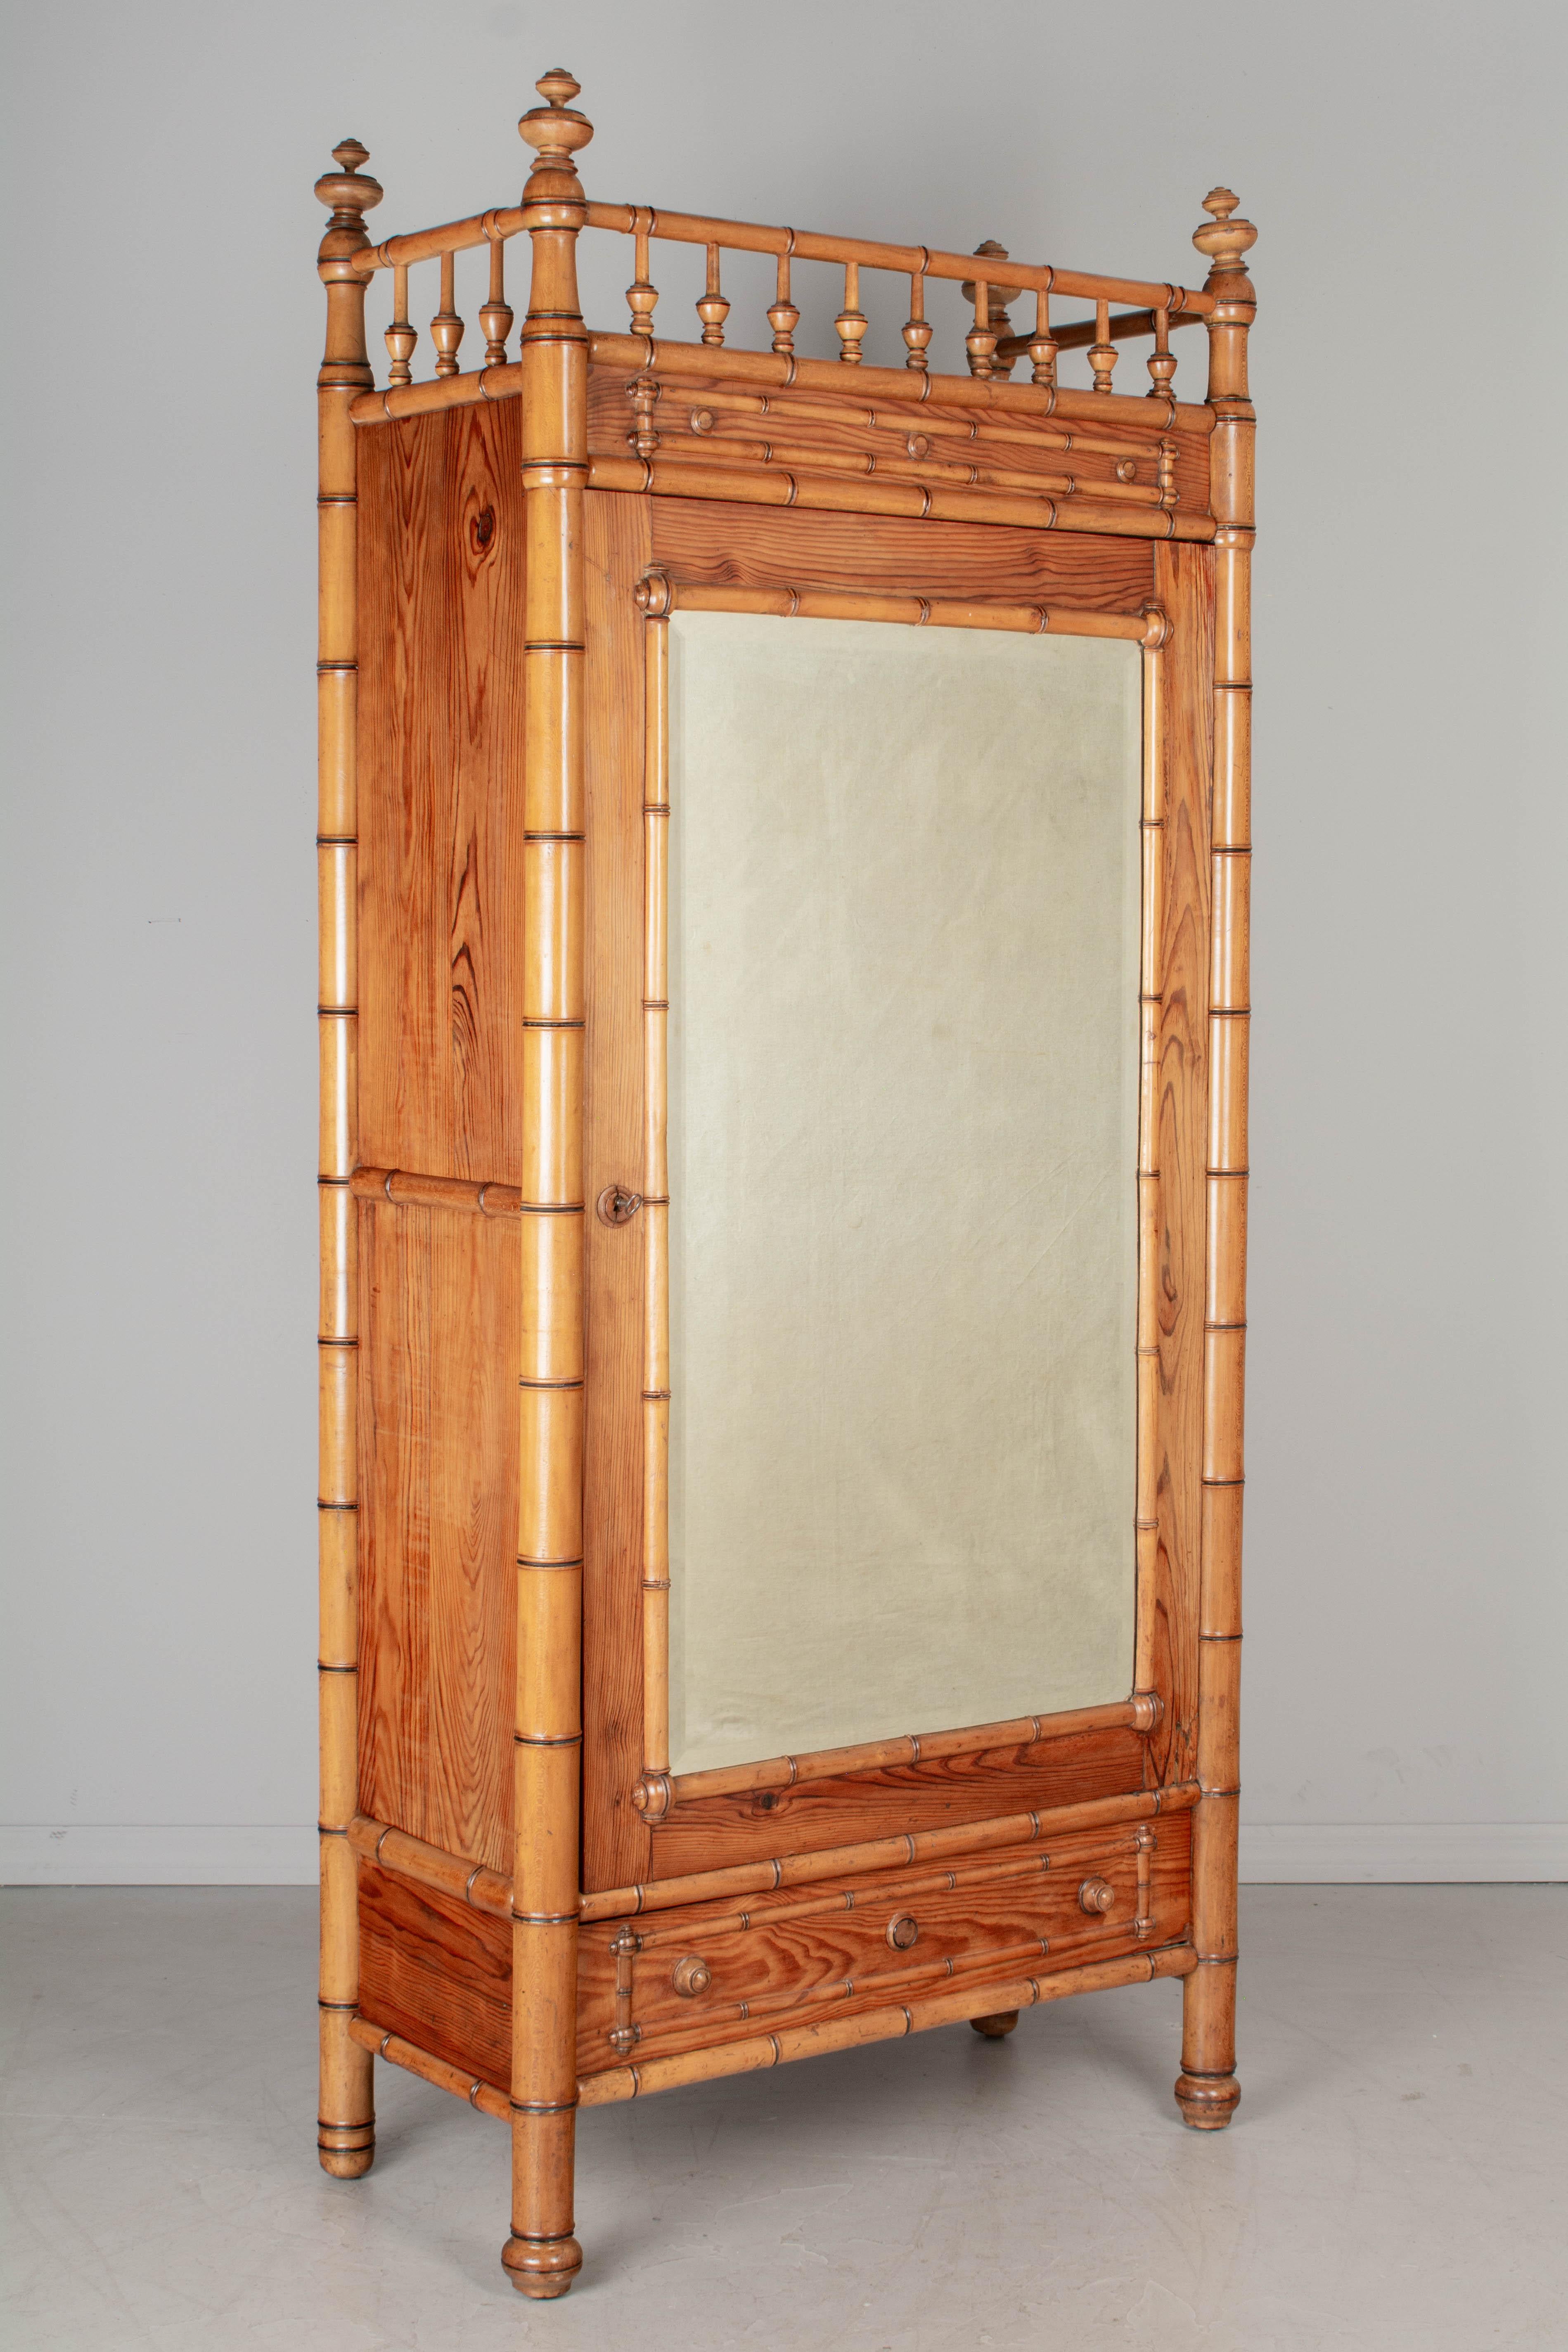 A 19th century French faux bamboo armoire, or wardrobe, made of pitch pine with solid beechwood faux bamboo details. Beveled mirror door opens to an interior with three adjustable shelves. One dovetailed drawer below the door. Working lock and key.